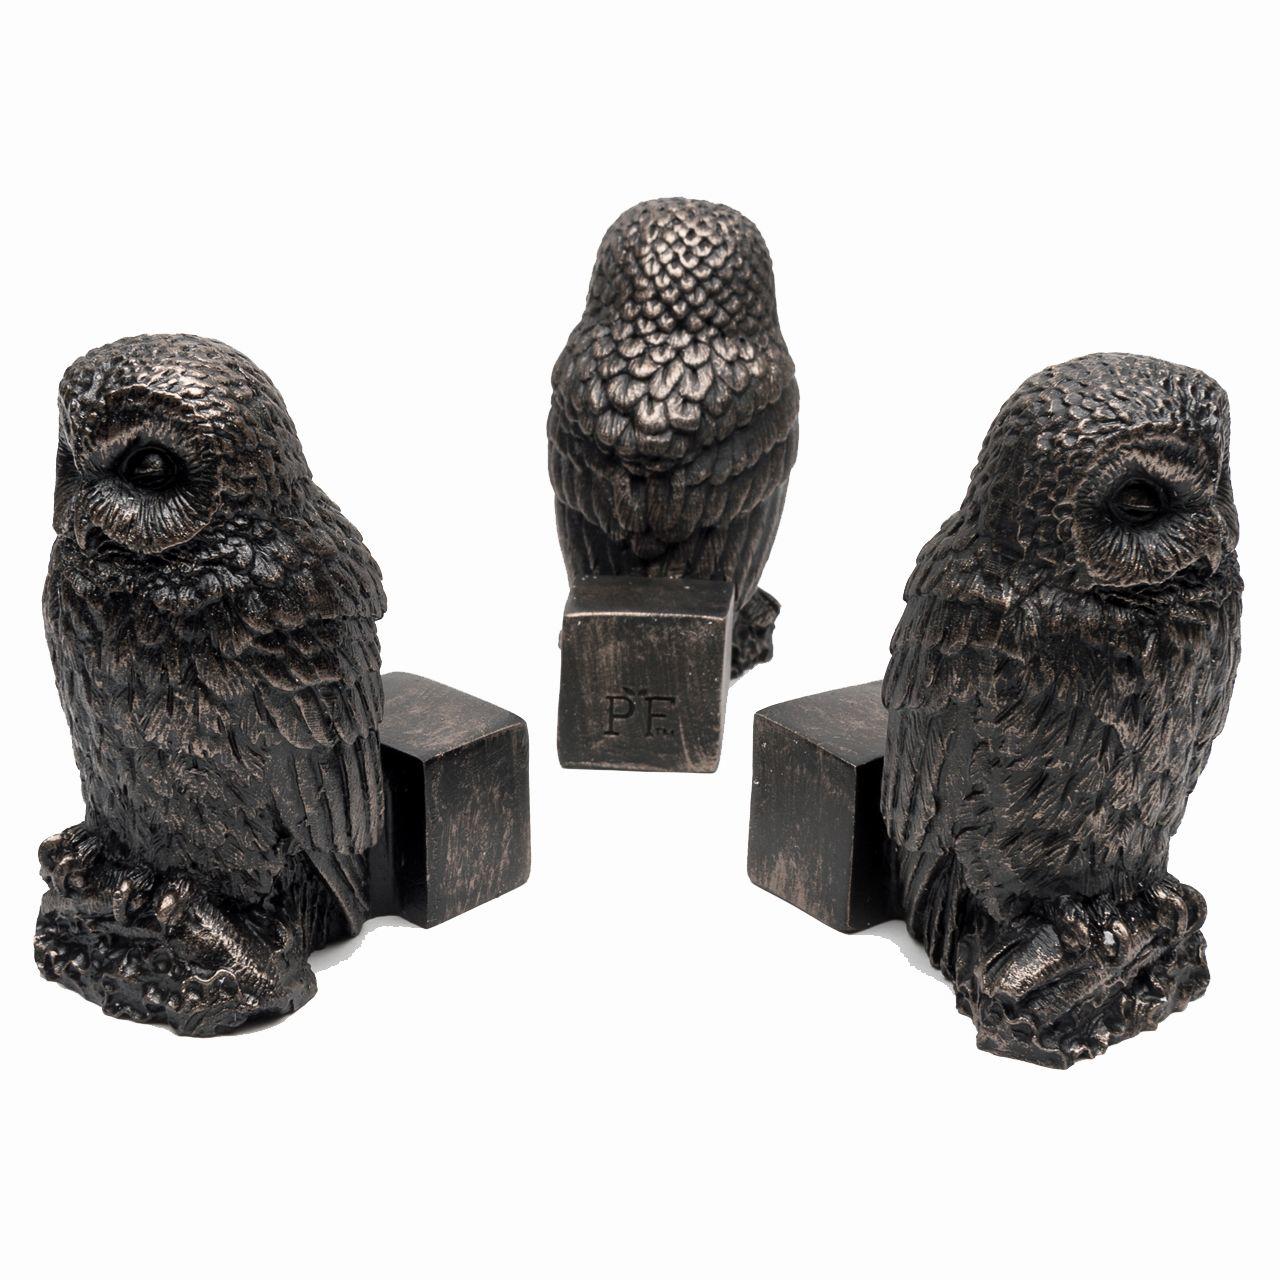 Owl Potty Feet To Give Your Pots a Lift